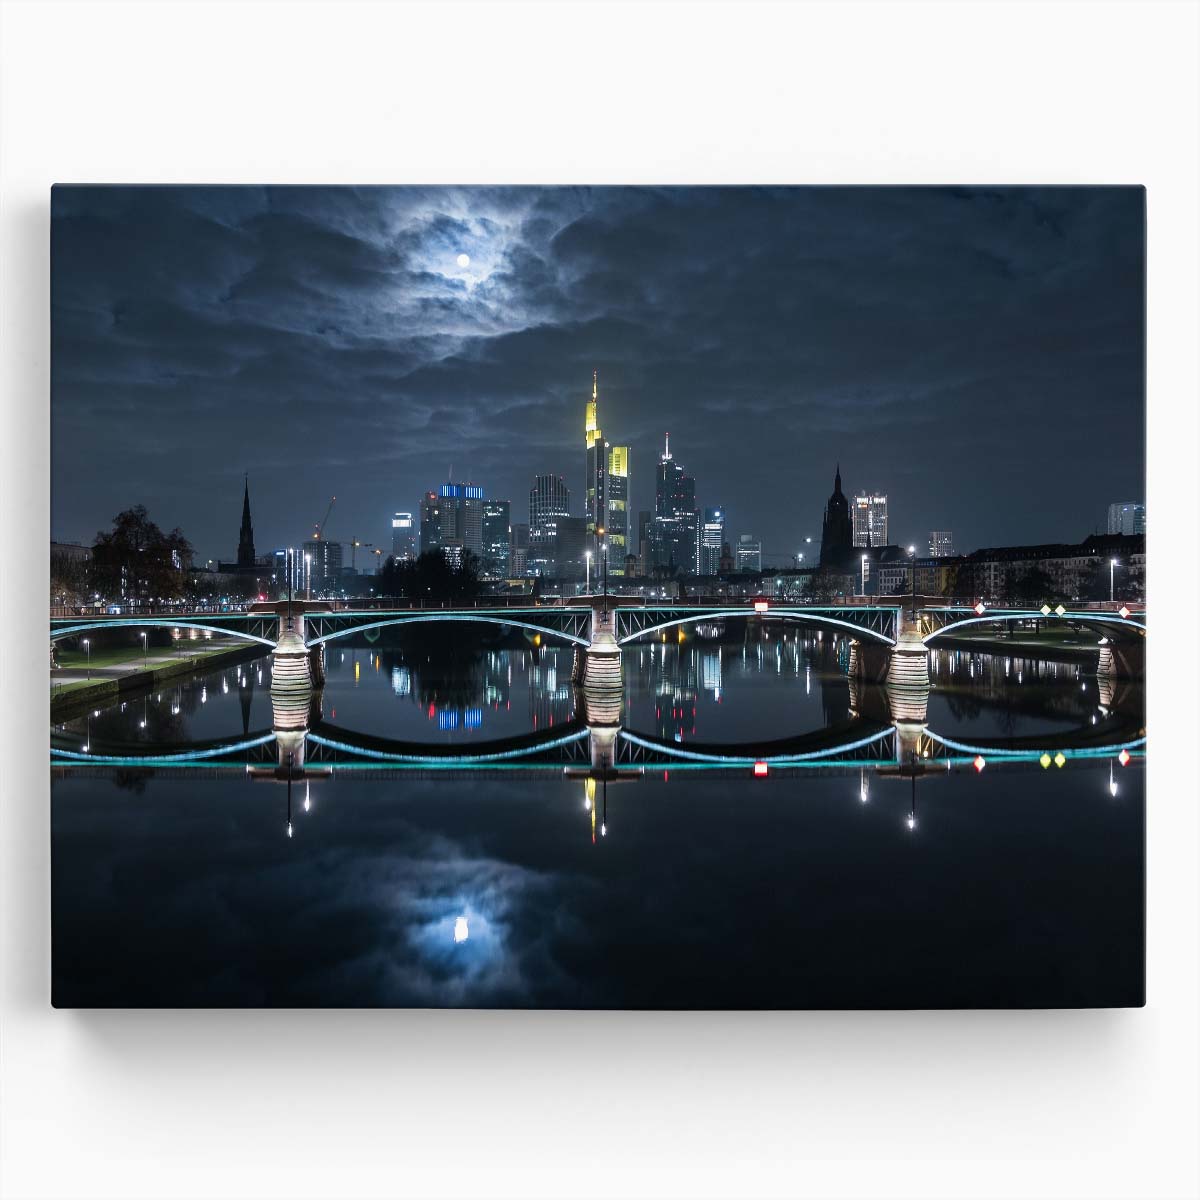 Frankfurt Skyline & Moonlit Reflections Wall Art by Luxuriance Designs. Made in USA.